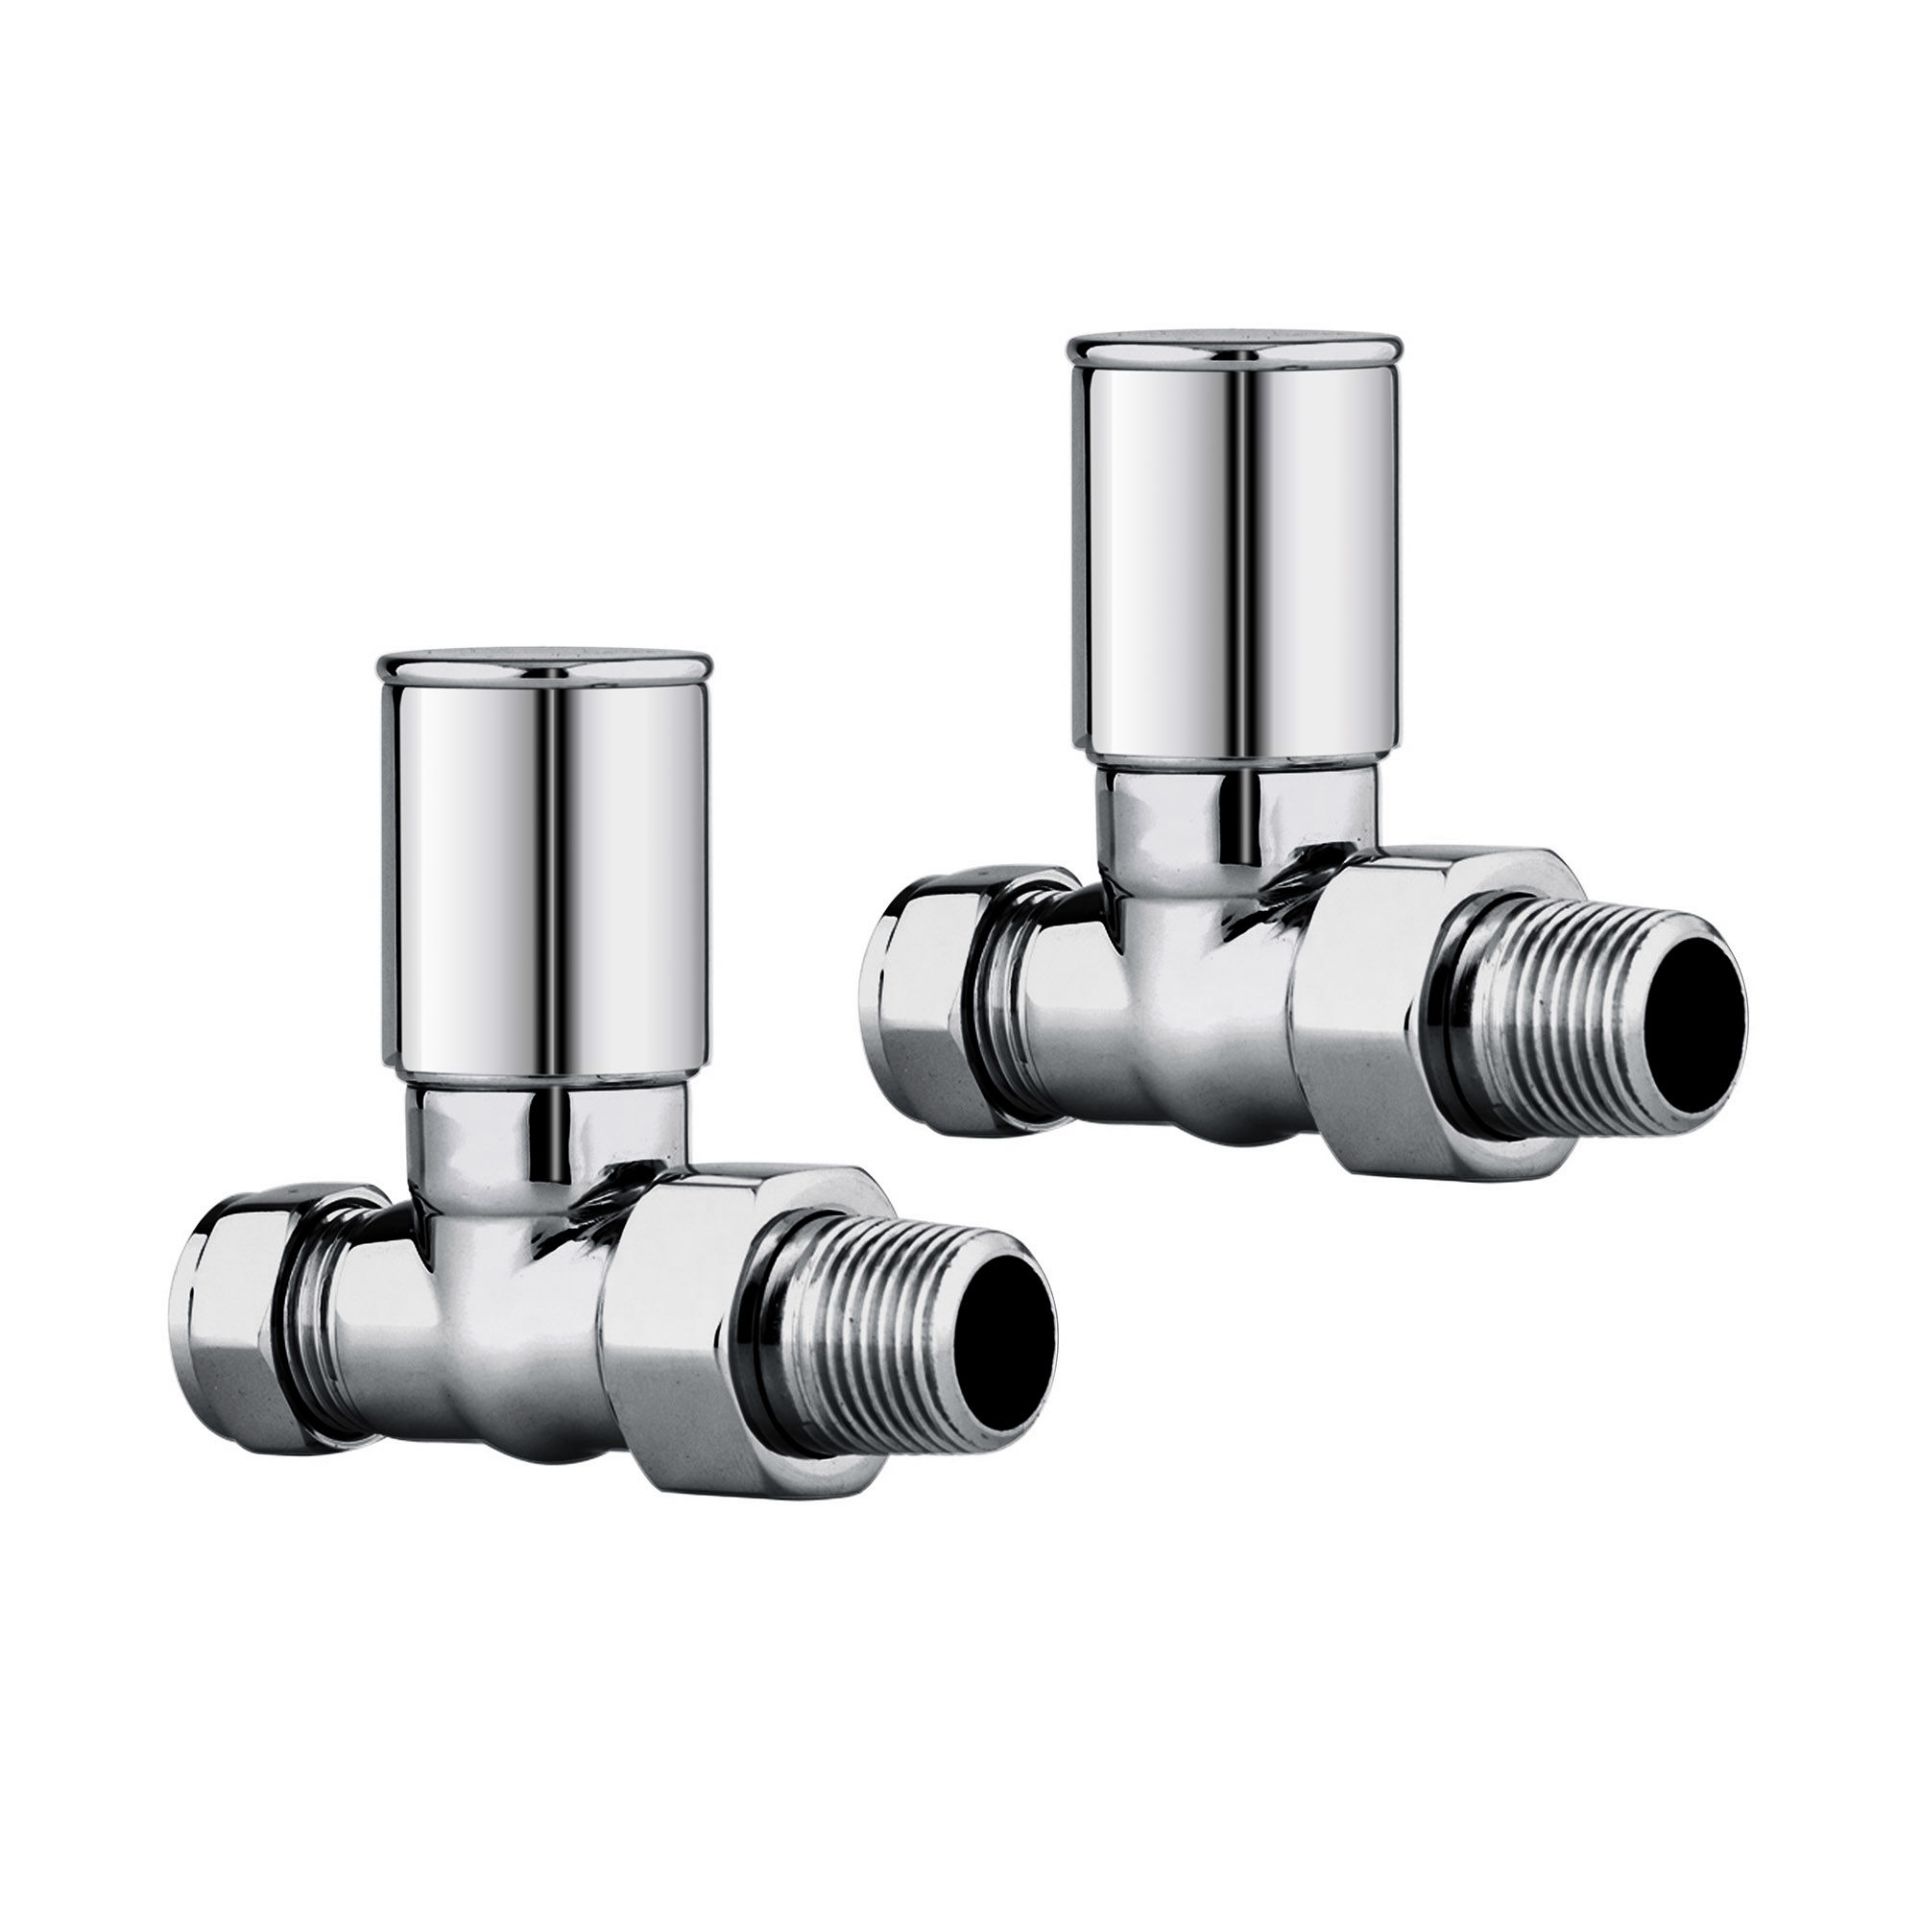 (QT1014) 15mm Standard Connection Straight Radiator Valves - Heavy Duty Polished Chrome Plated ... - Image 3 of 4